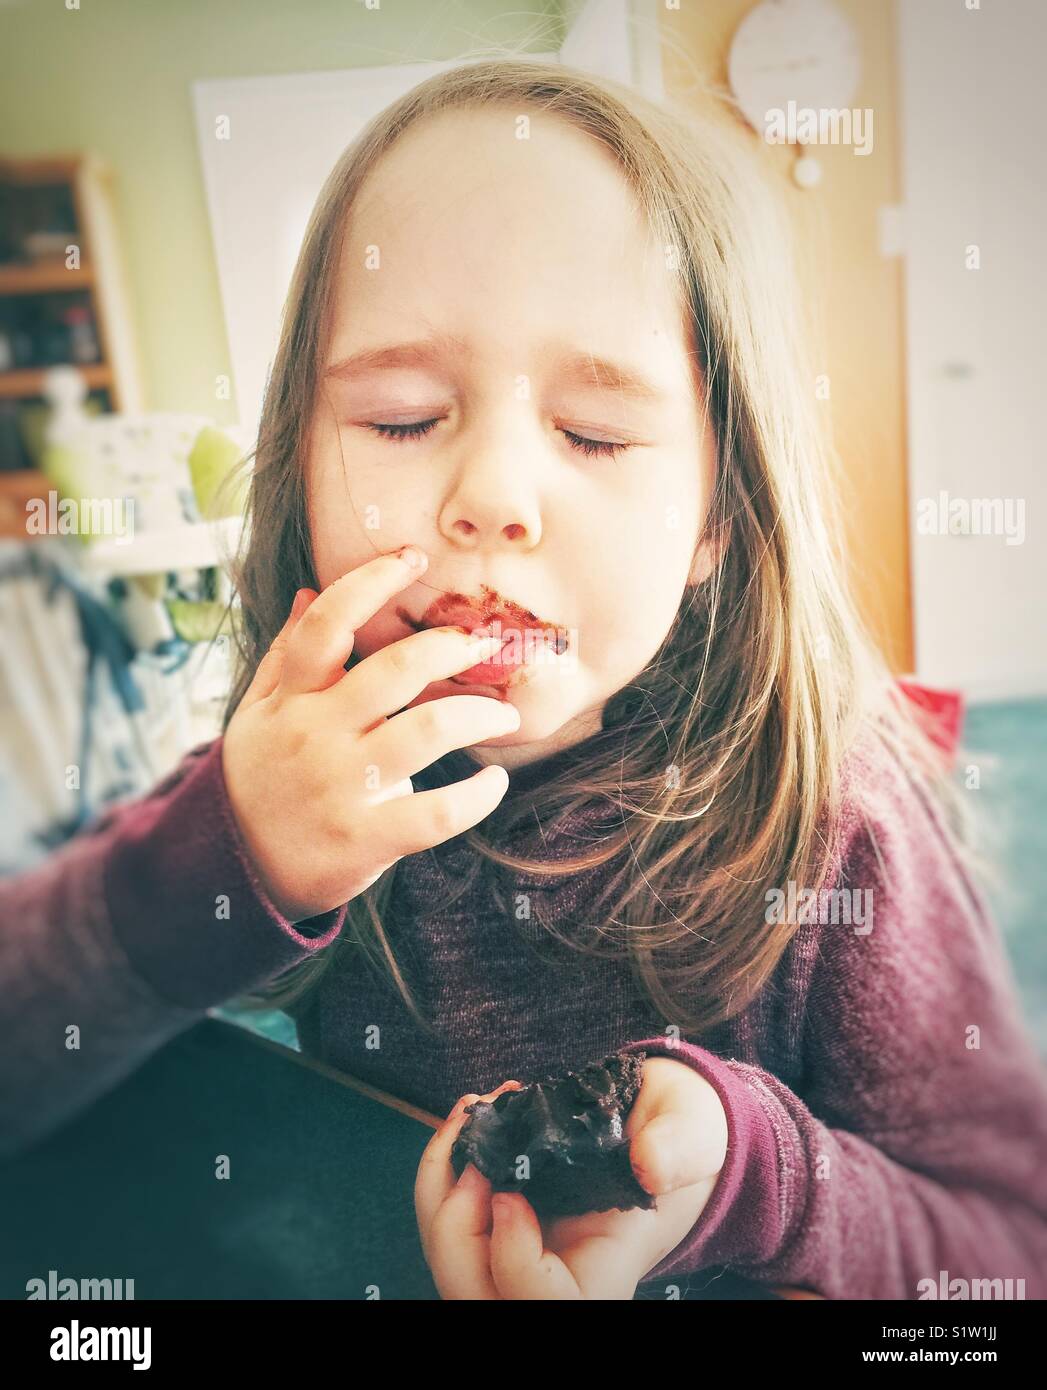 4 year old girl eating a chocolate brownie with a look of pure enjoyment on her face Stock Photo